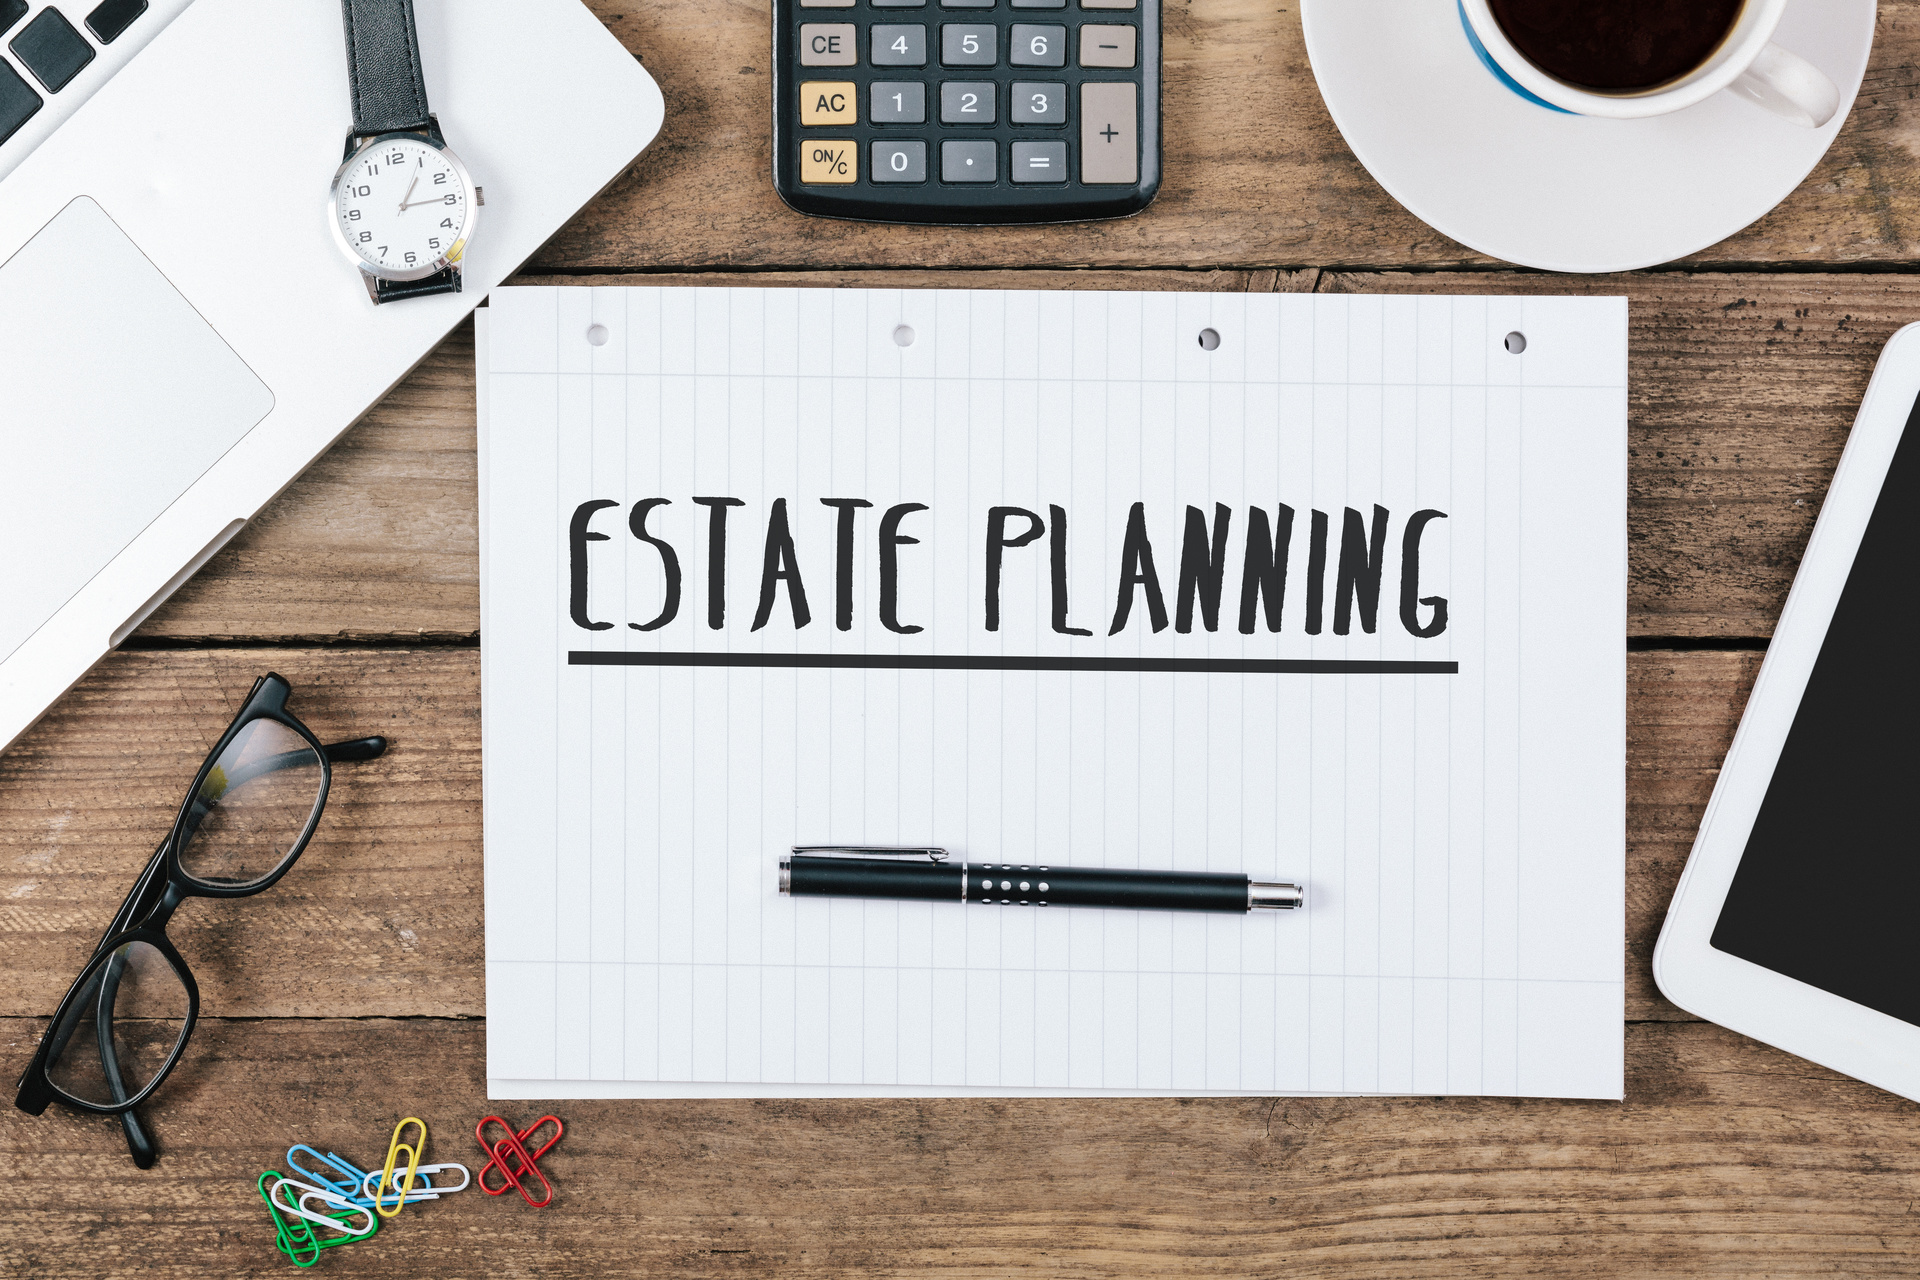 A notepad with "Estate Planning" written on, with other desk items around; our Wills Solicitors in Lancaster discuss inheritance tax planning by gifting property.